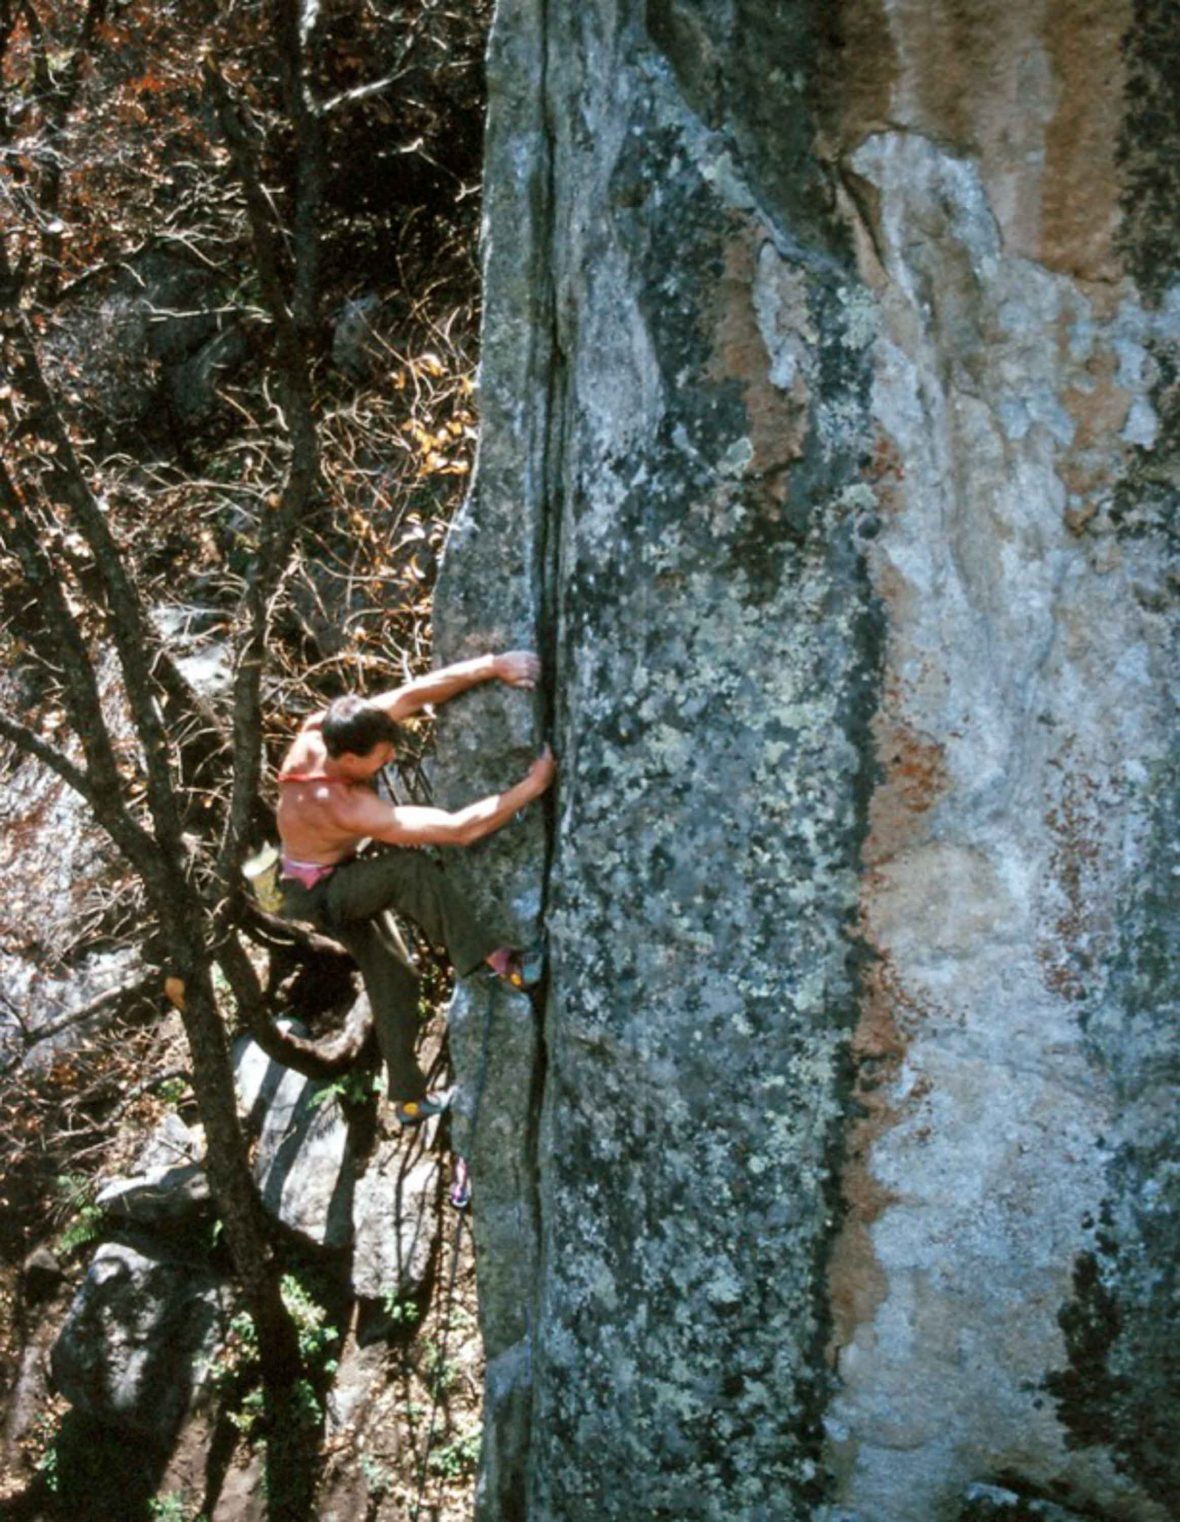 A young Ken Yager with no shirt on climbs a rock face.